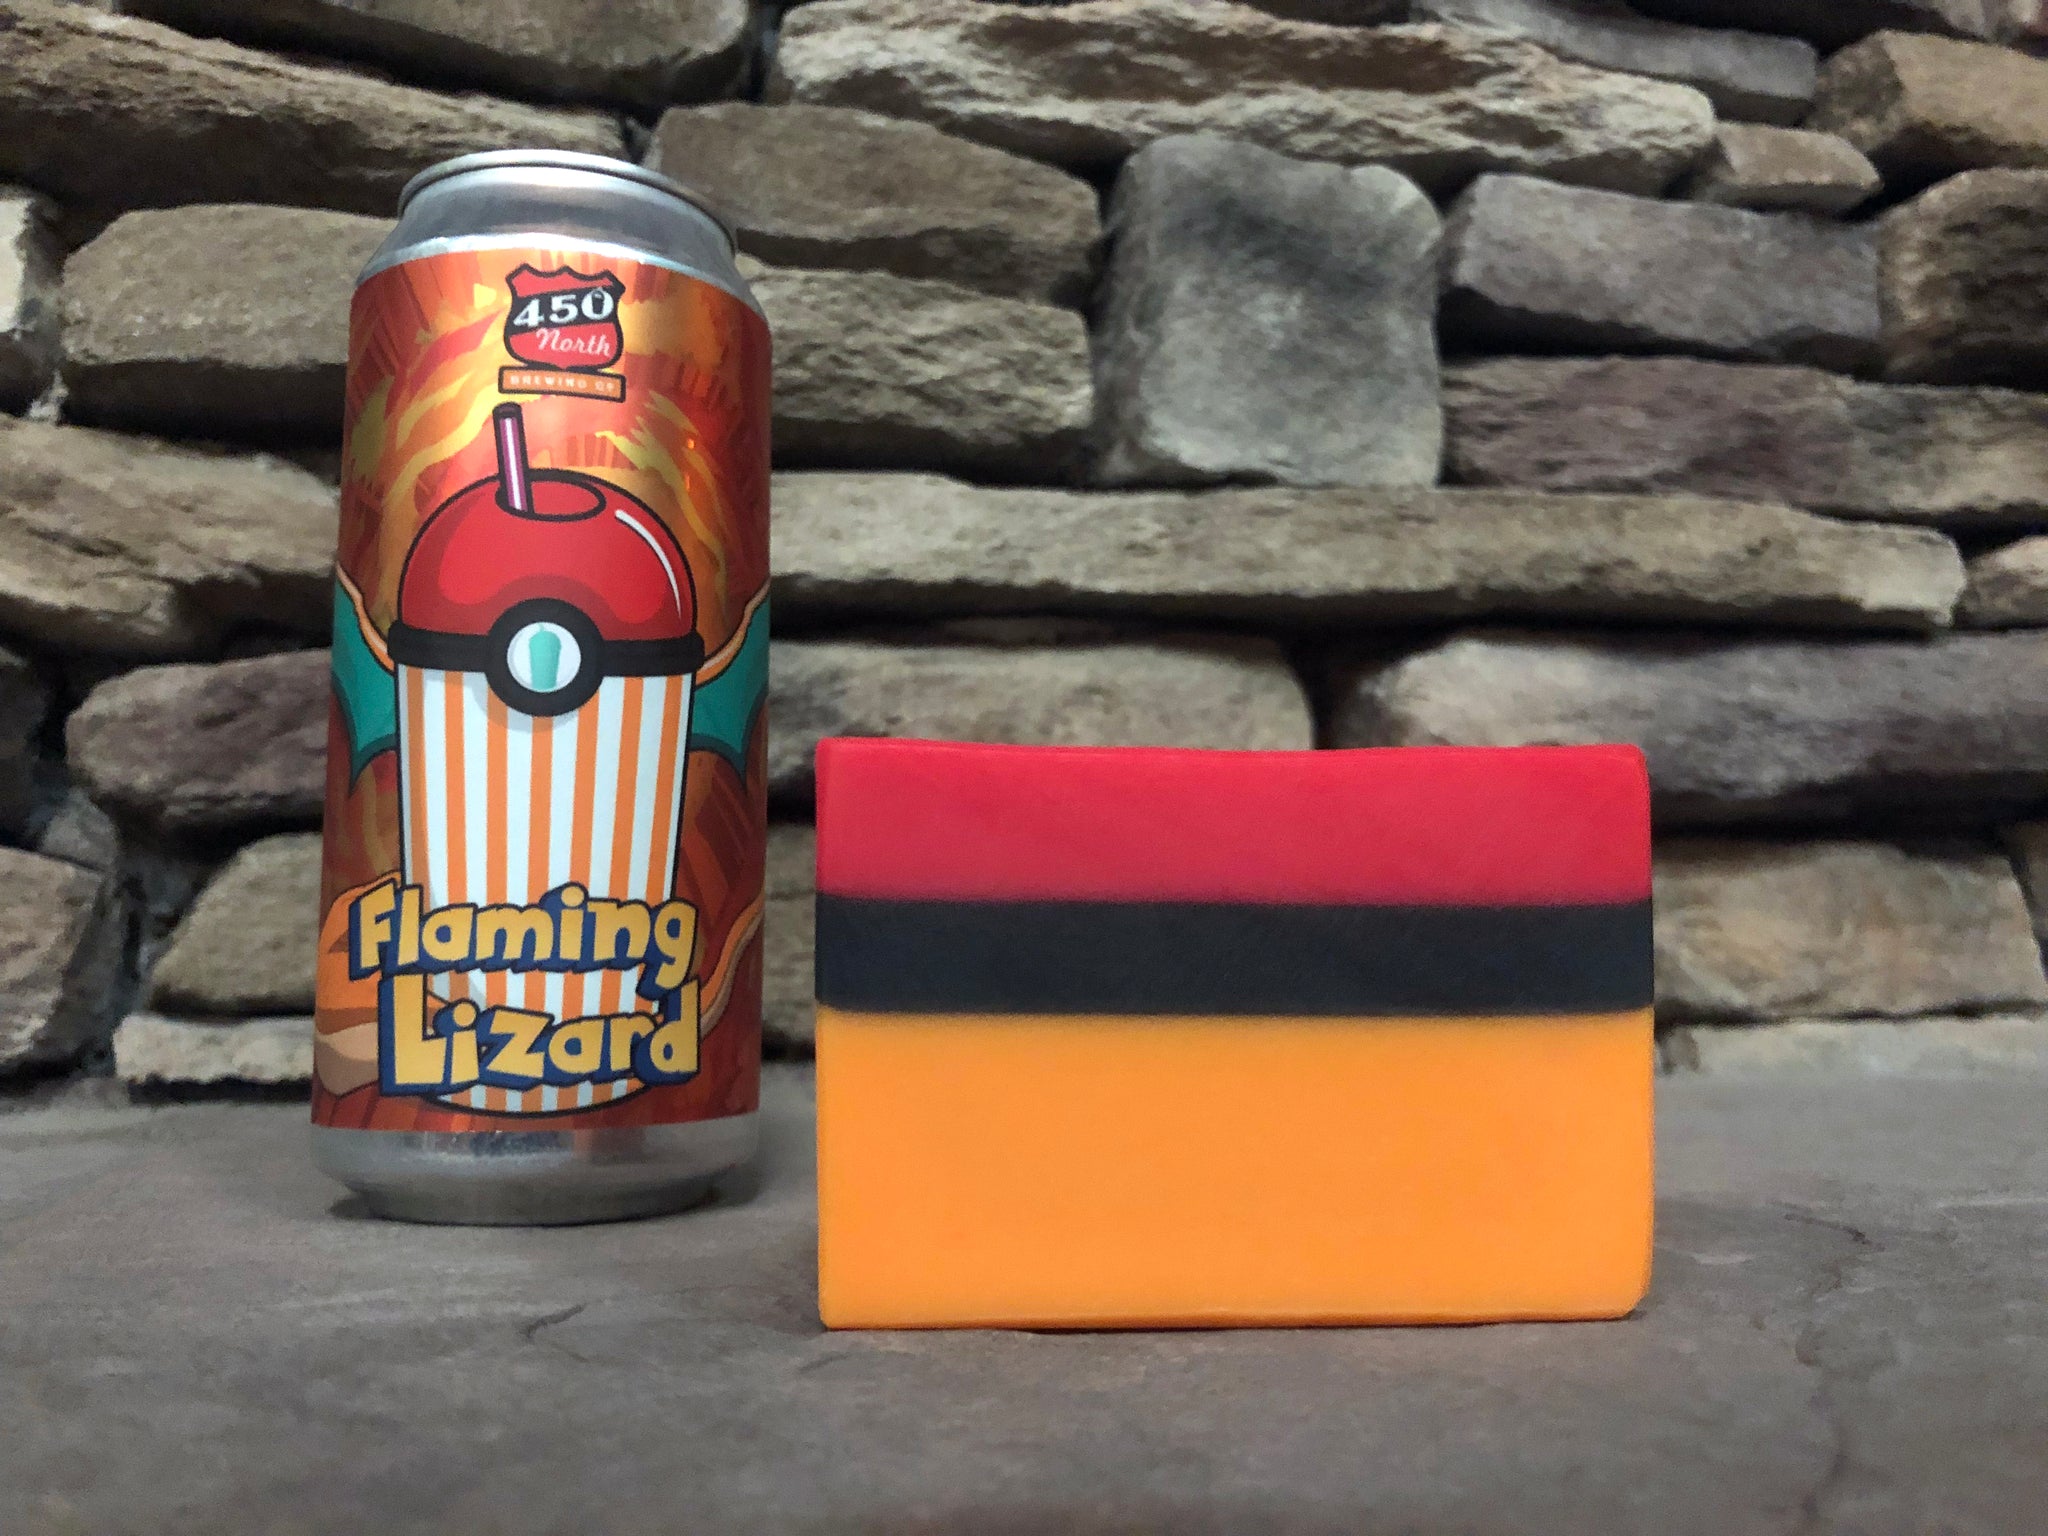 Pokemon soap red orange and black beer soap for him with activated charcoal made in indiana with flaming lizard slushy xxl from 450 north brewing company beer soap by spunkndisorderly craft beer soaps spunkndisorderly.com